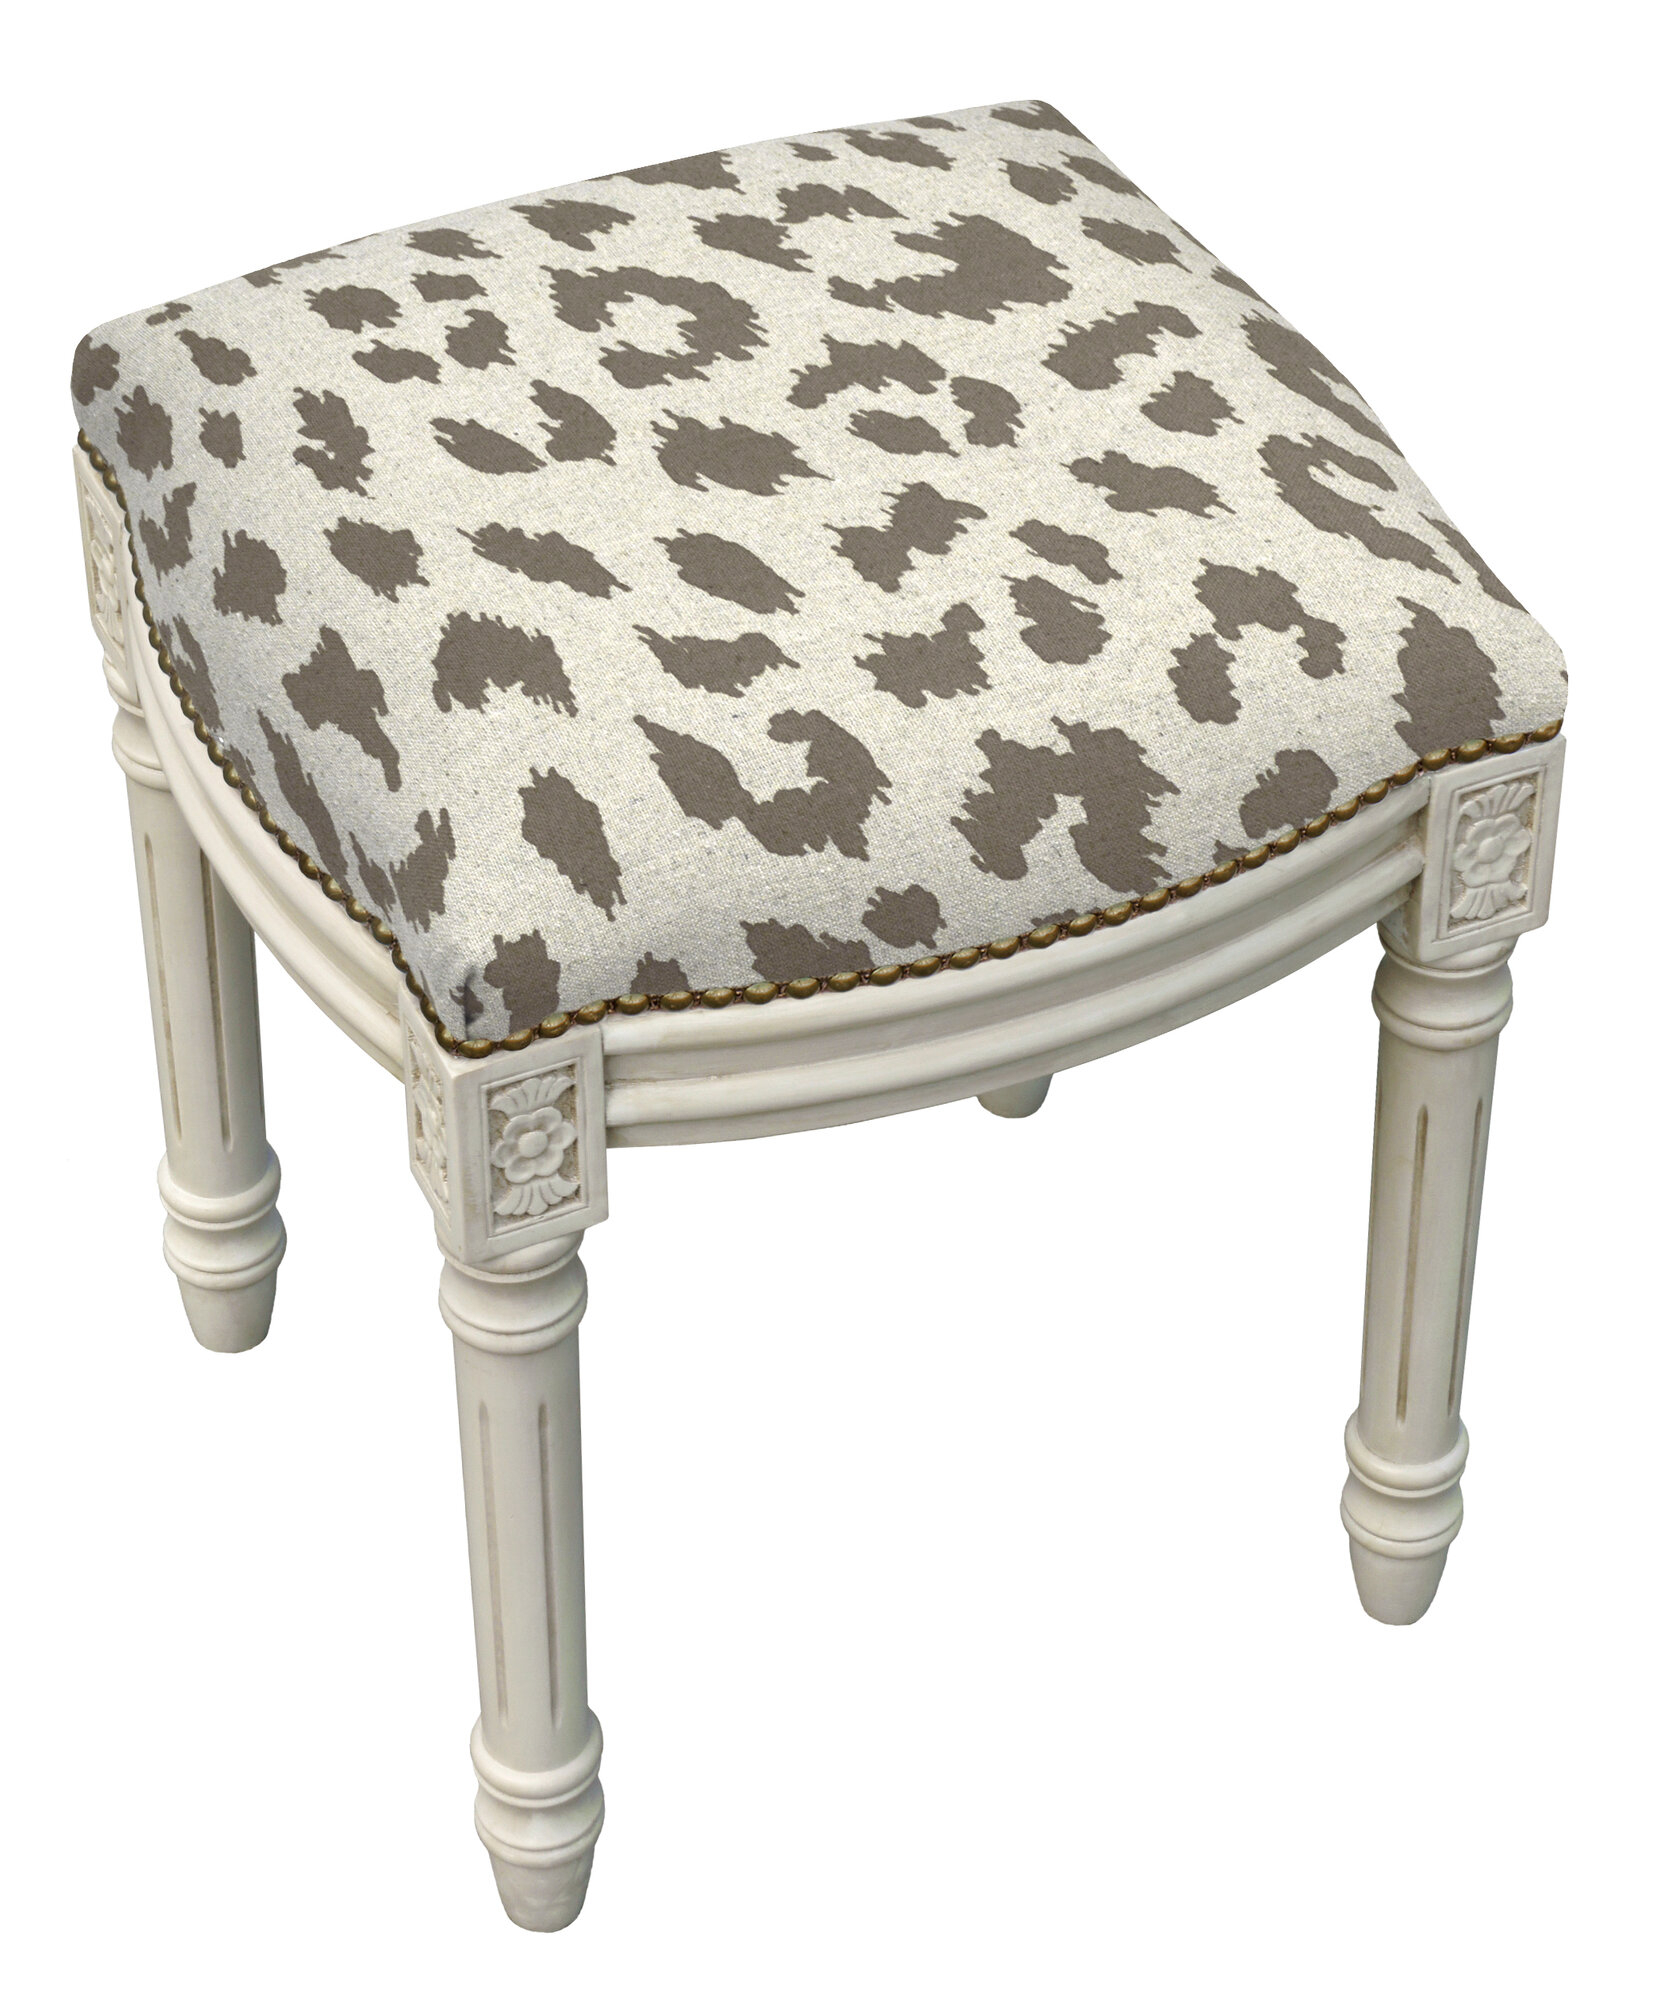 Leopard dining chair